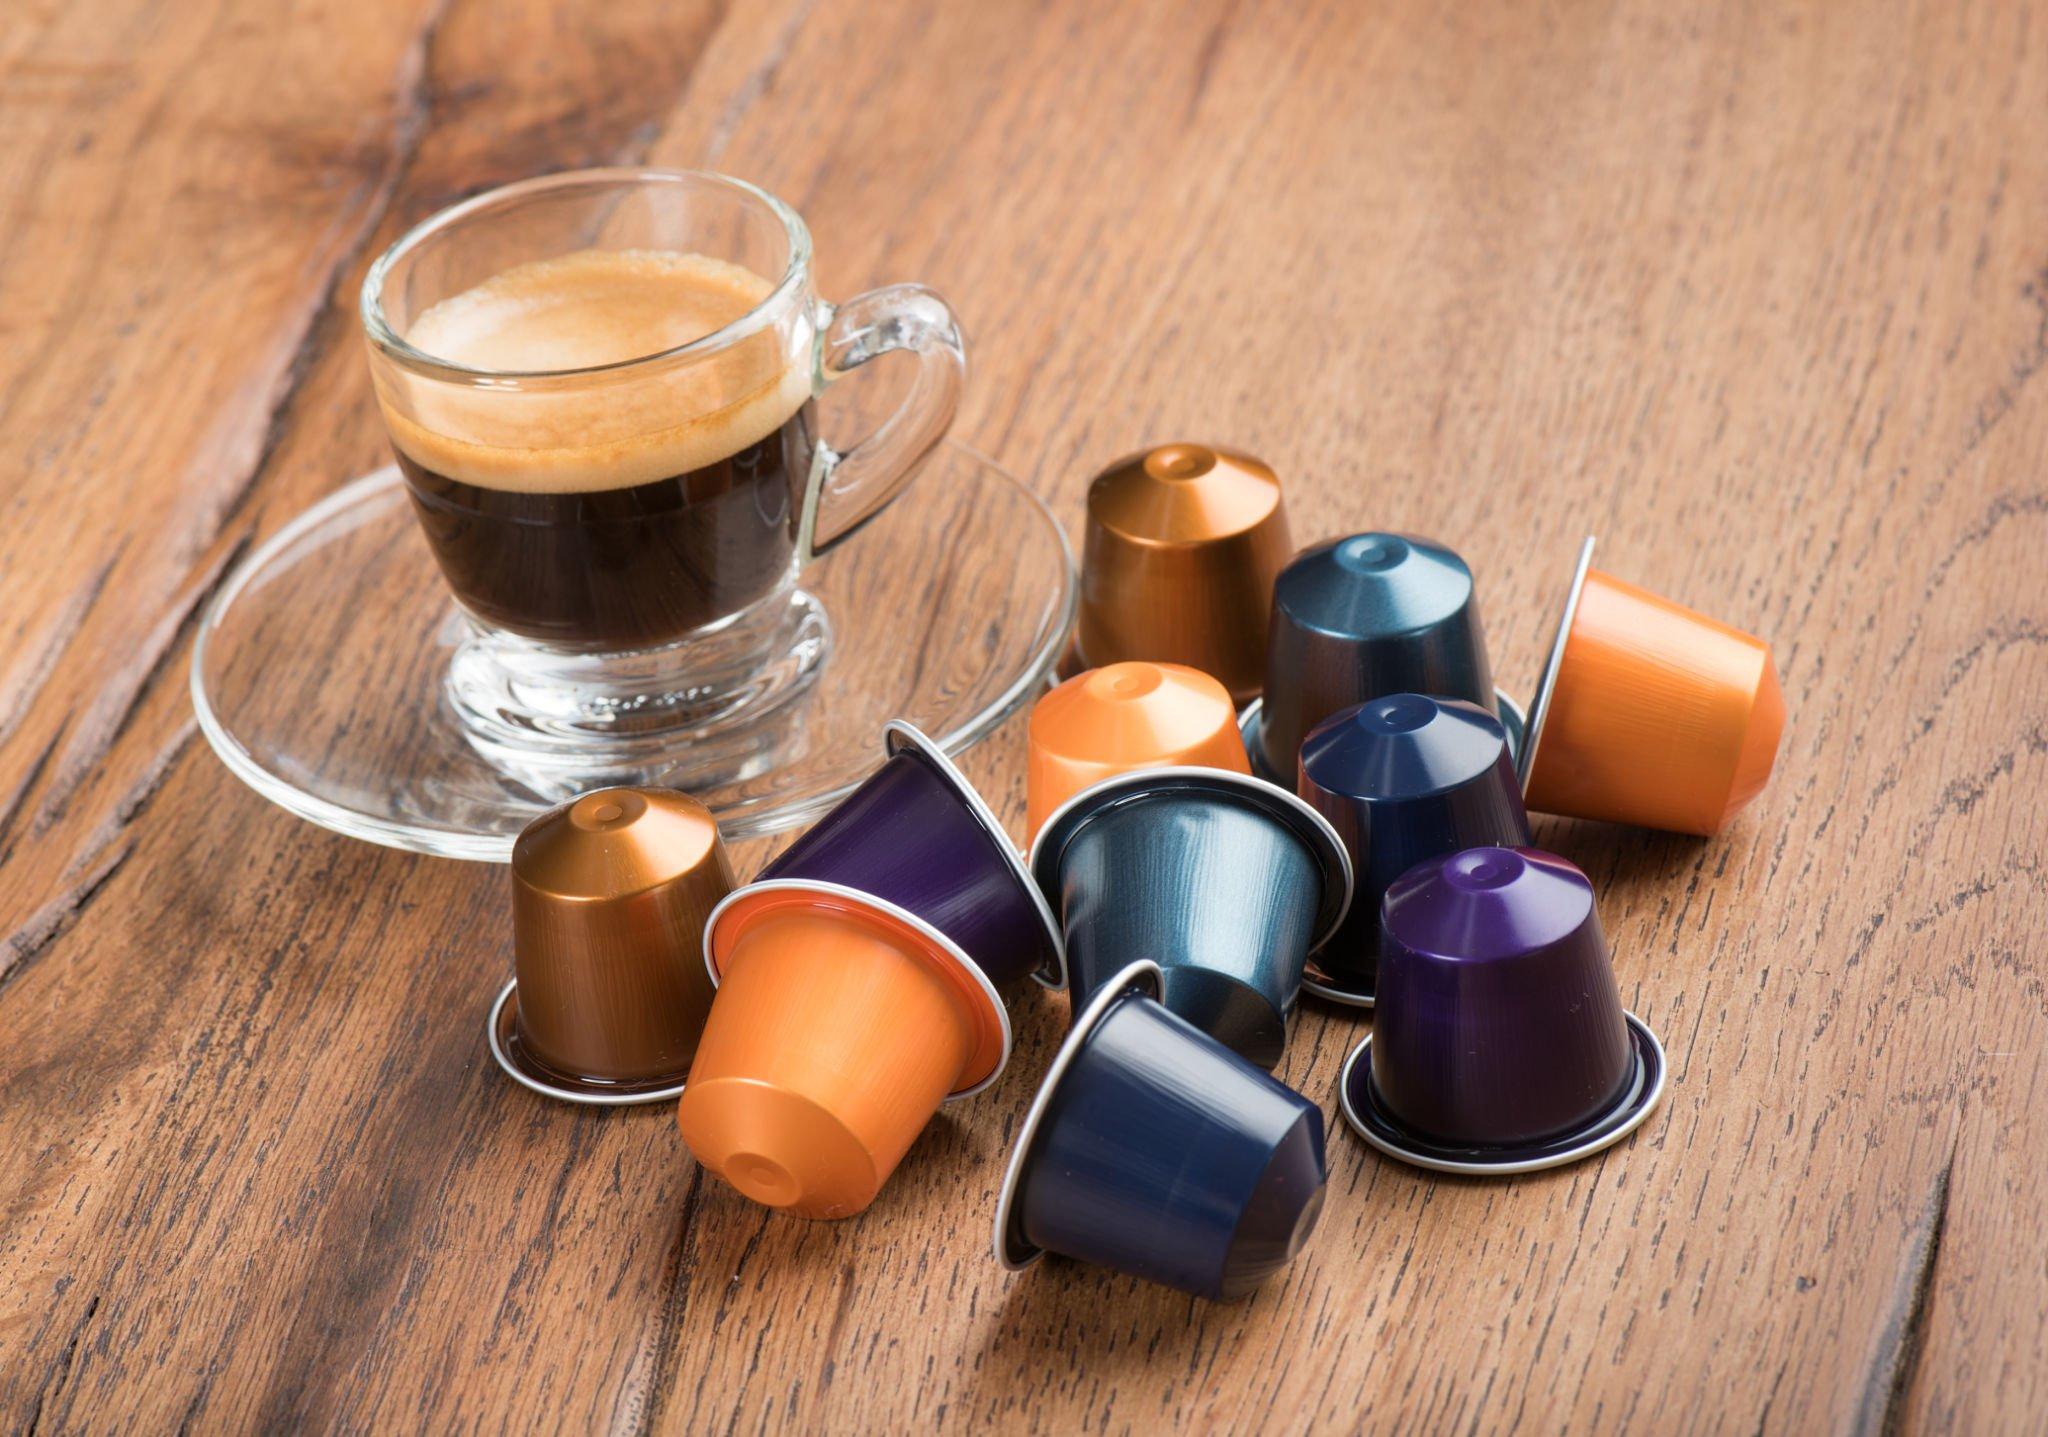 Which Coffee Is Best: Pods or Ground? Compare & Decide!